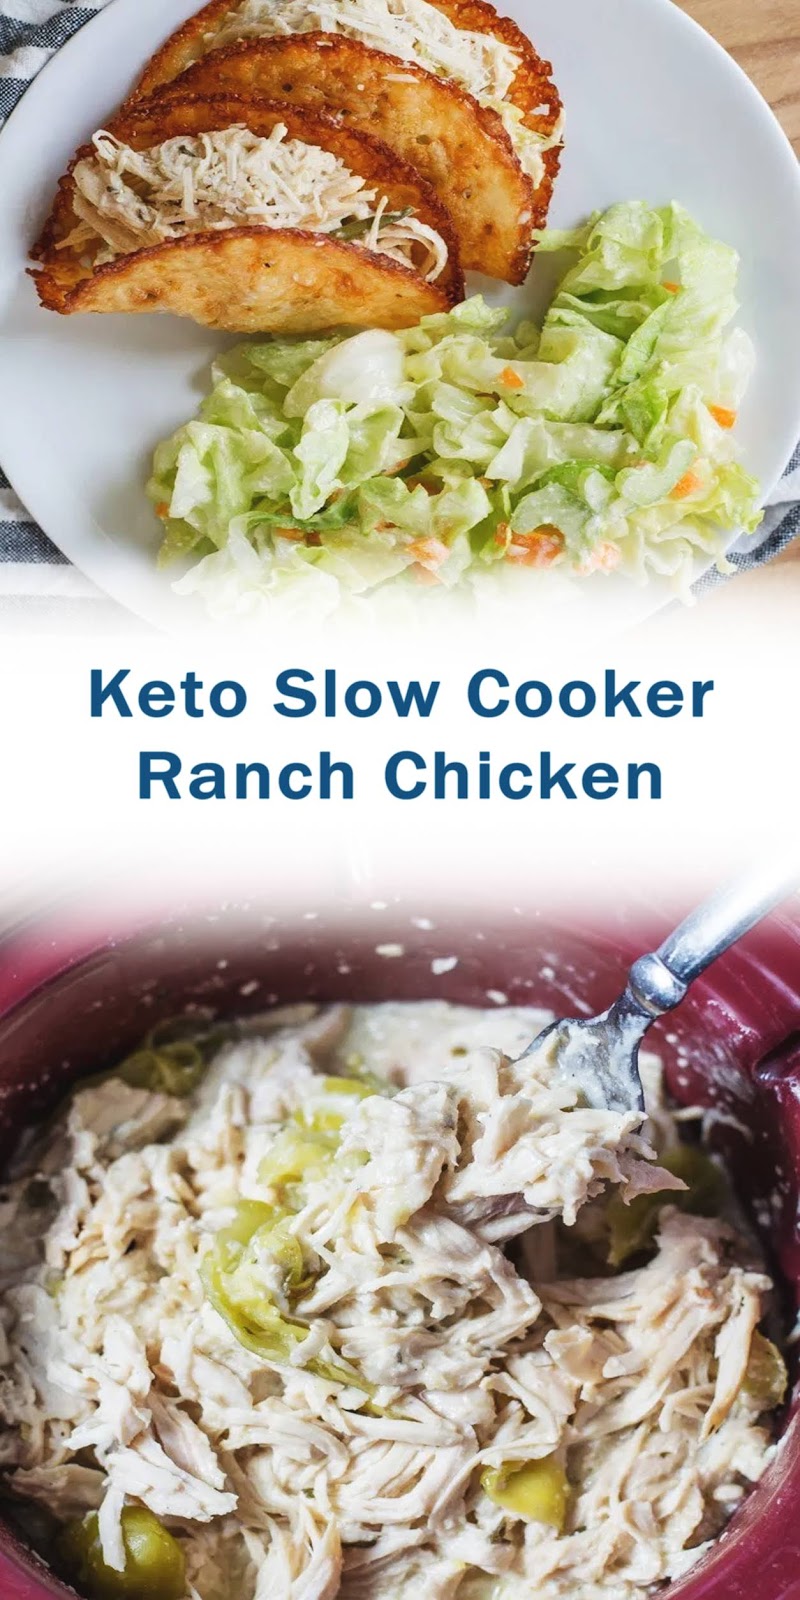 Keto Slow Cooker Ranch Chicken